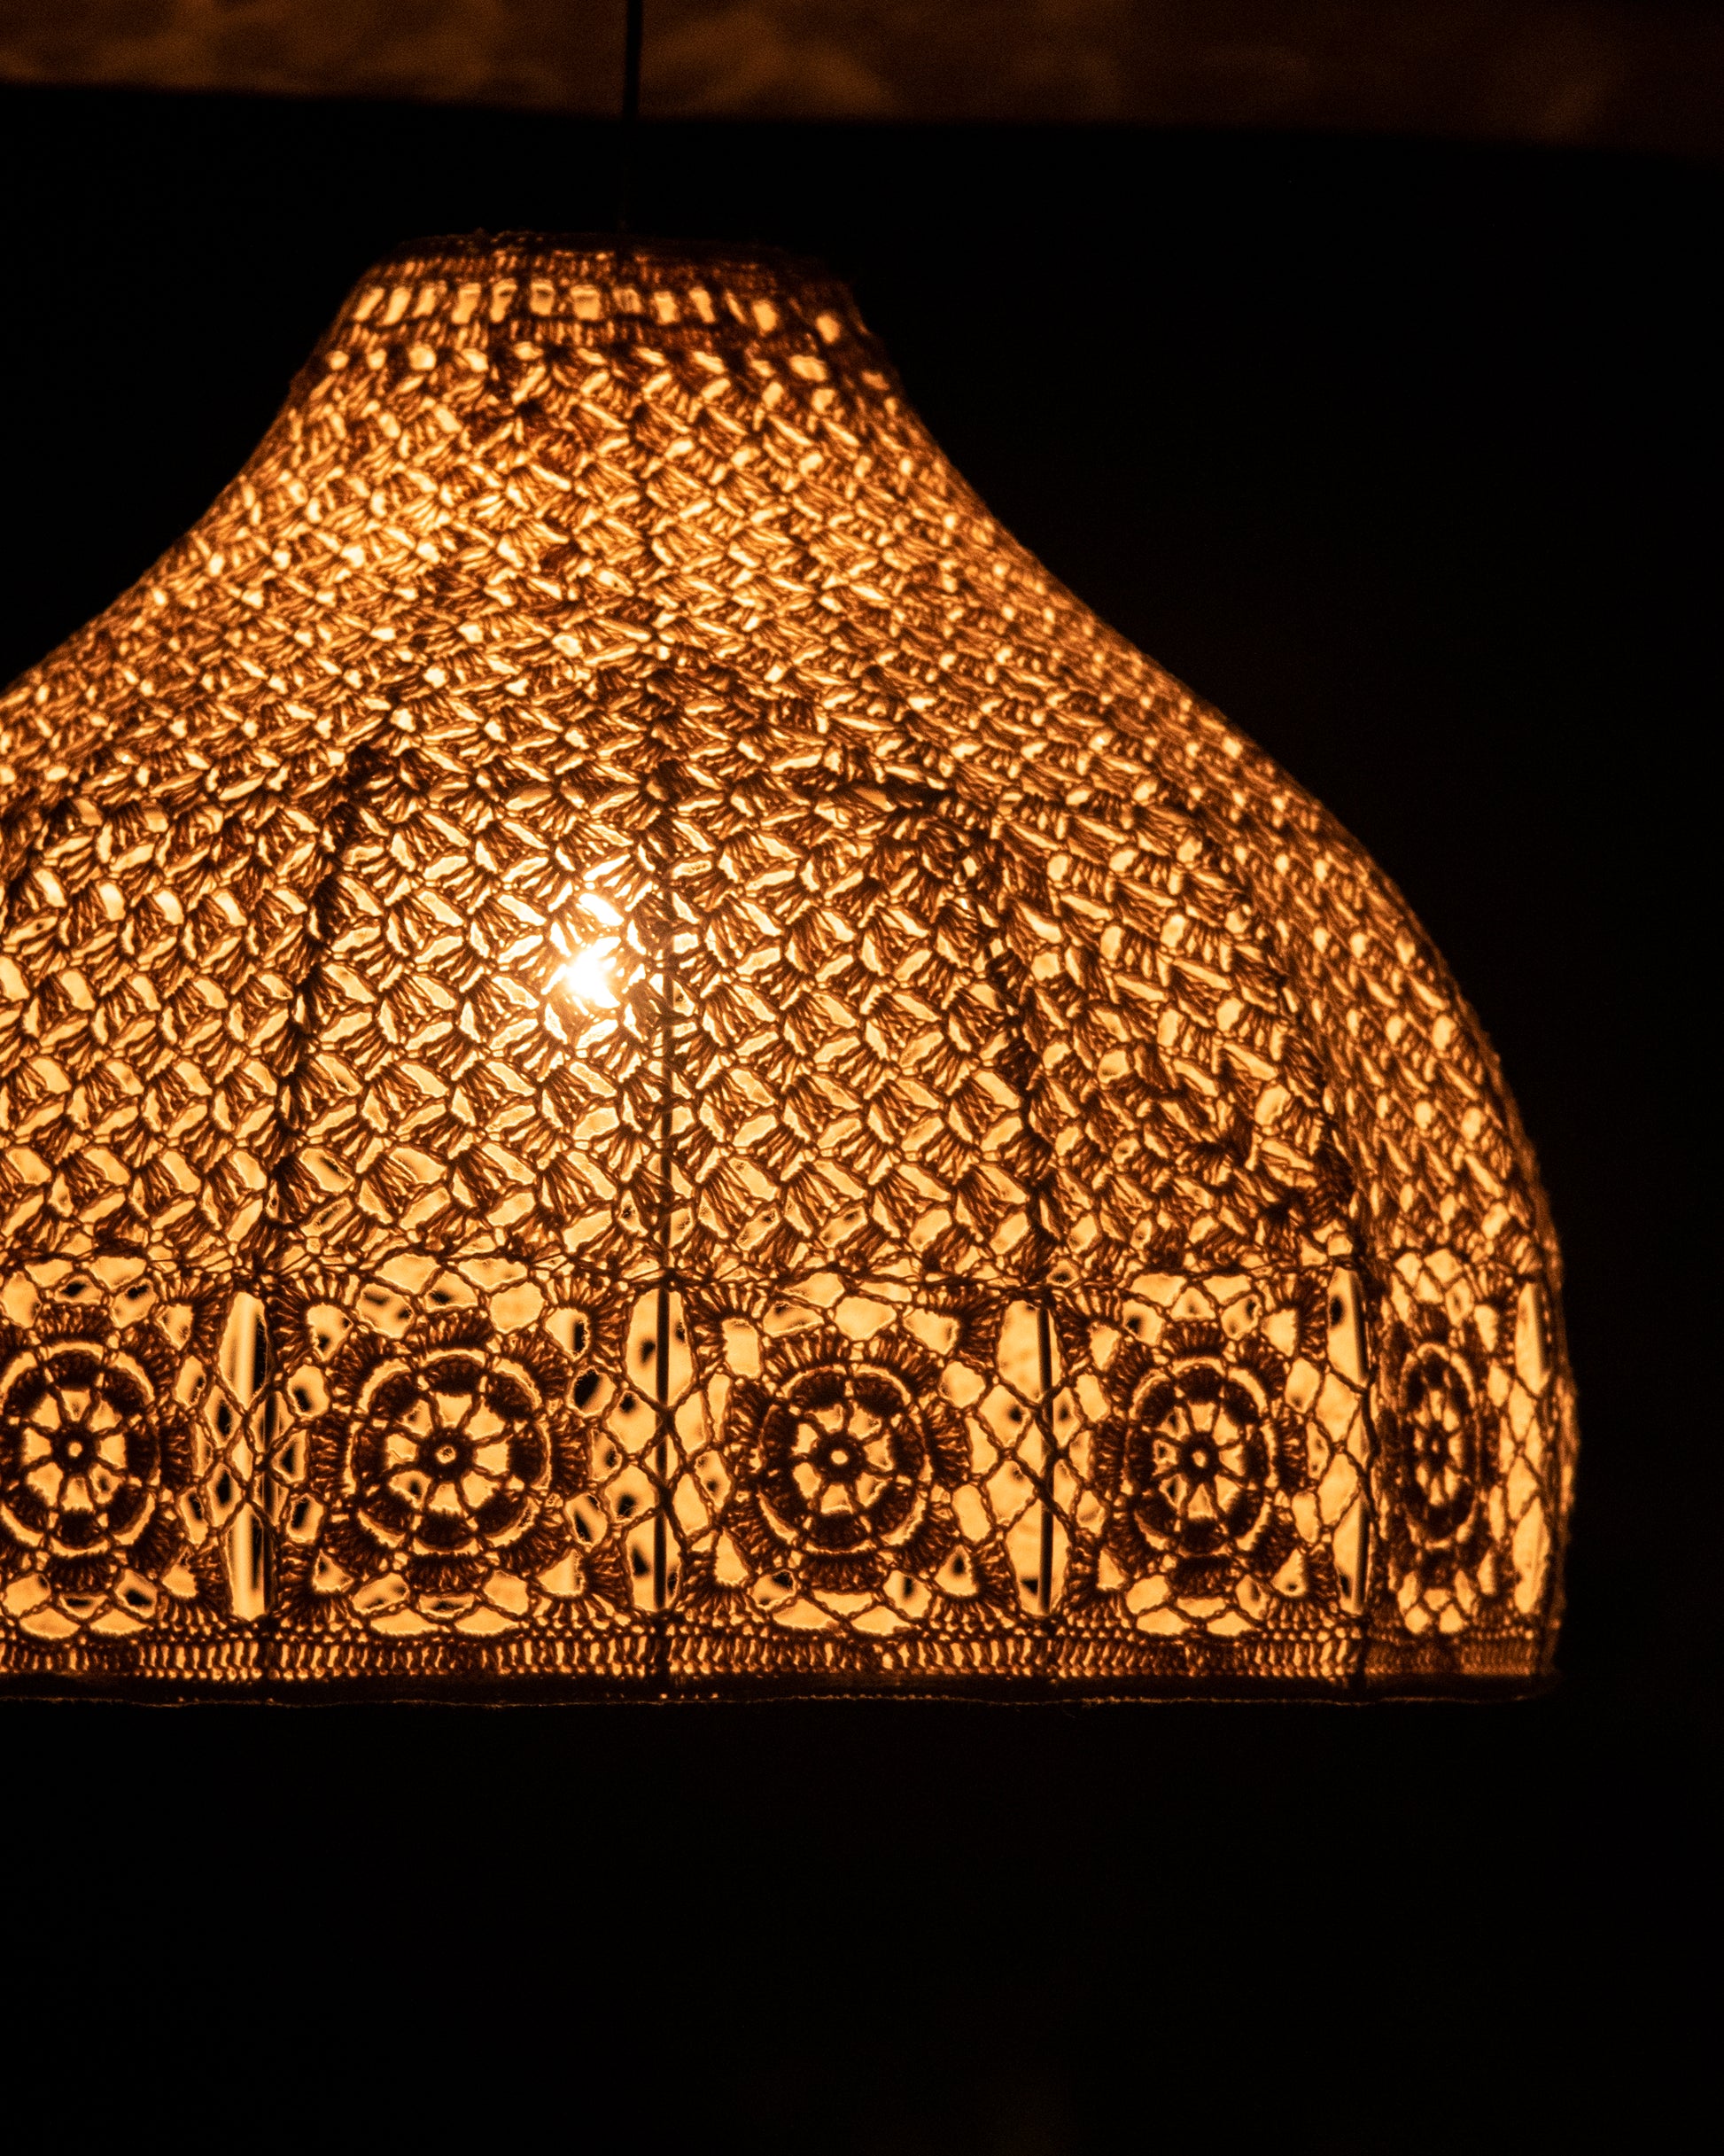 Buy Best Lampshade for your Dream Home & garden Decor, This lamp made with detailed handwork of macramé by our skilled artisans. It can be styled in any corner of your house and will look gorgeous. with warm white light to bring the peaceful bohemian vibe.TESU